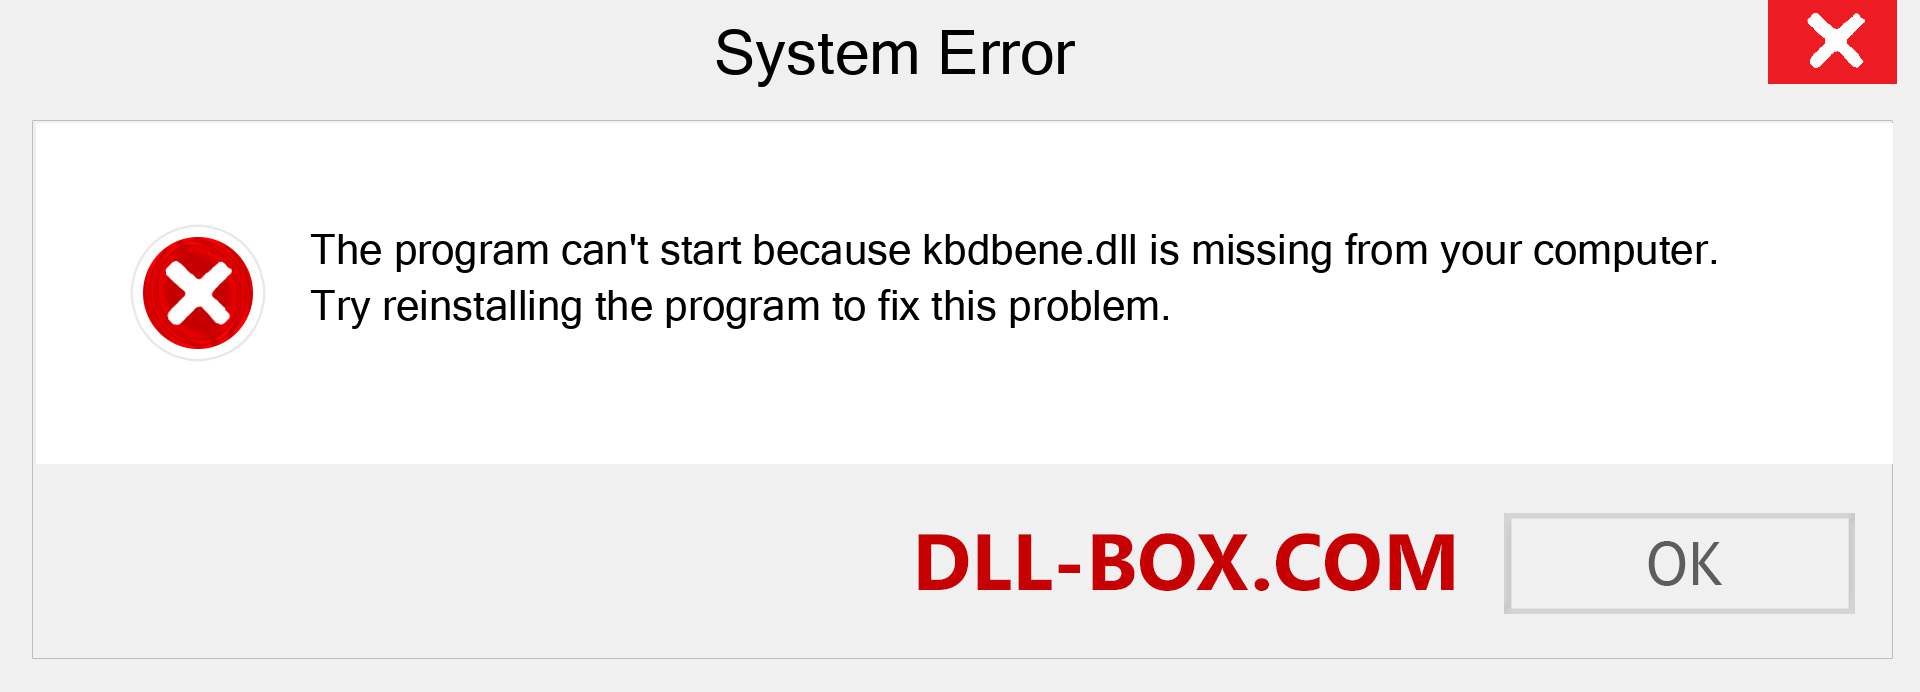  kbdbene.dll file is missing?. Download for Windows 7, 8, 10 - Fix  kbdbene dll Missing Error on Windows, photos, images